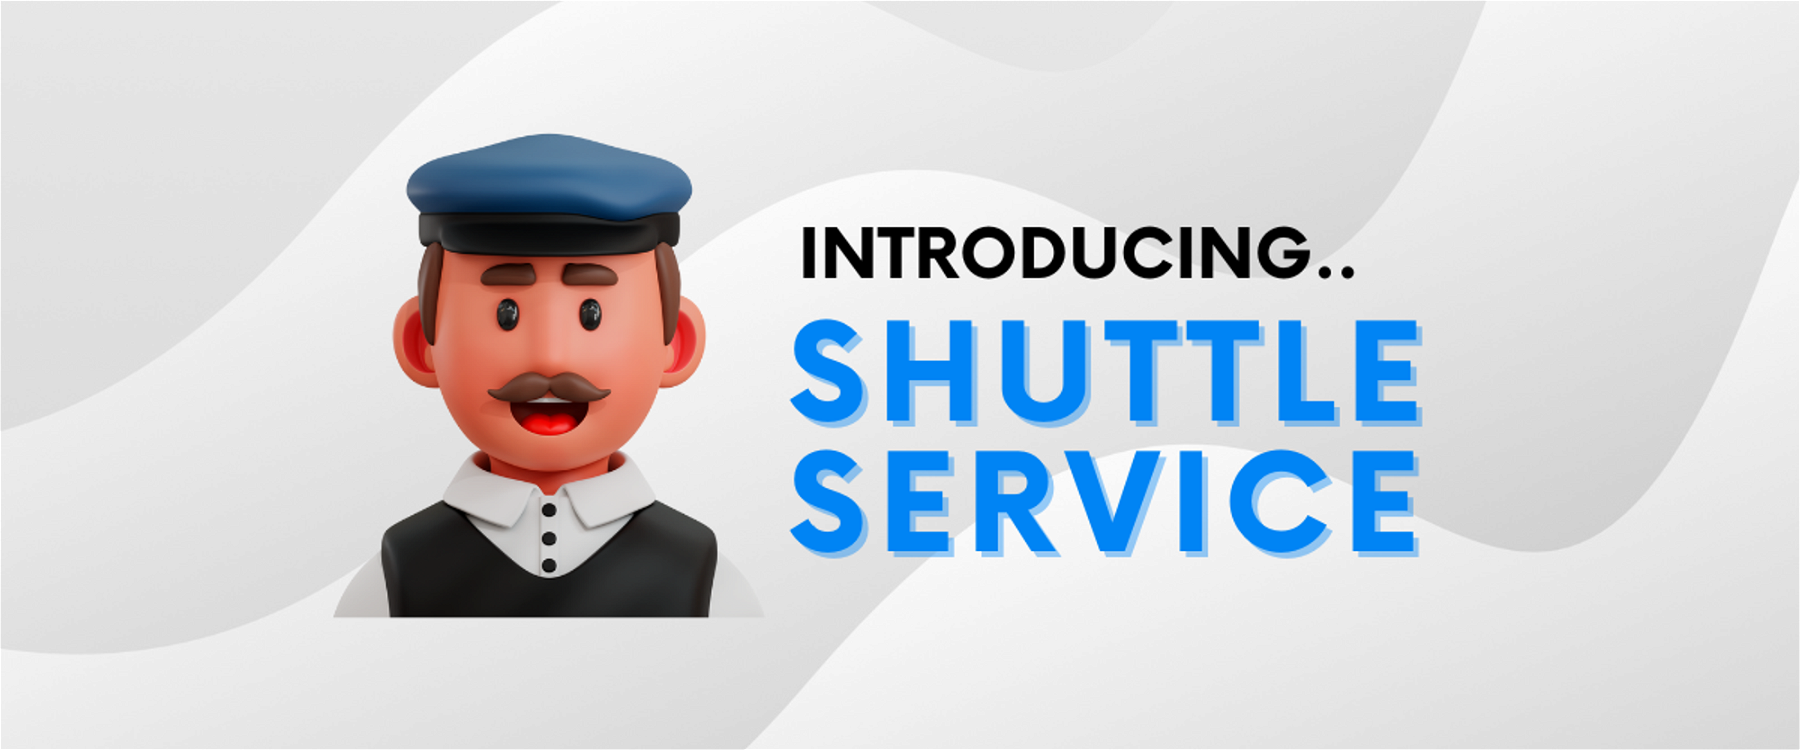 Introducing Shuttle Service To Help You Dash Better